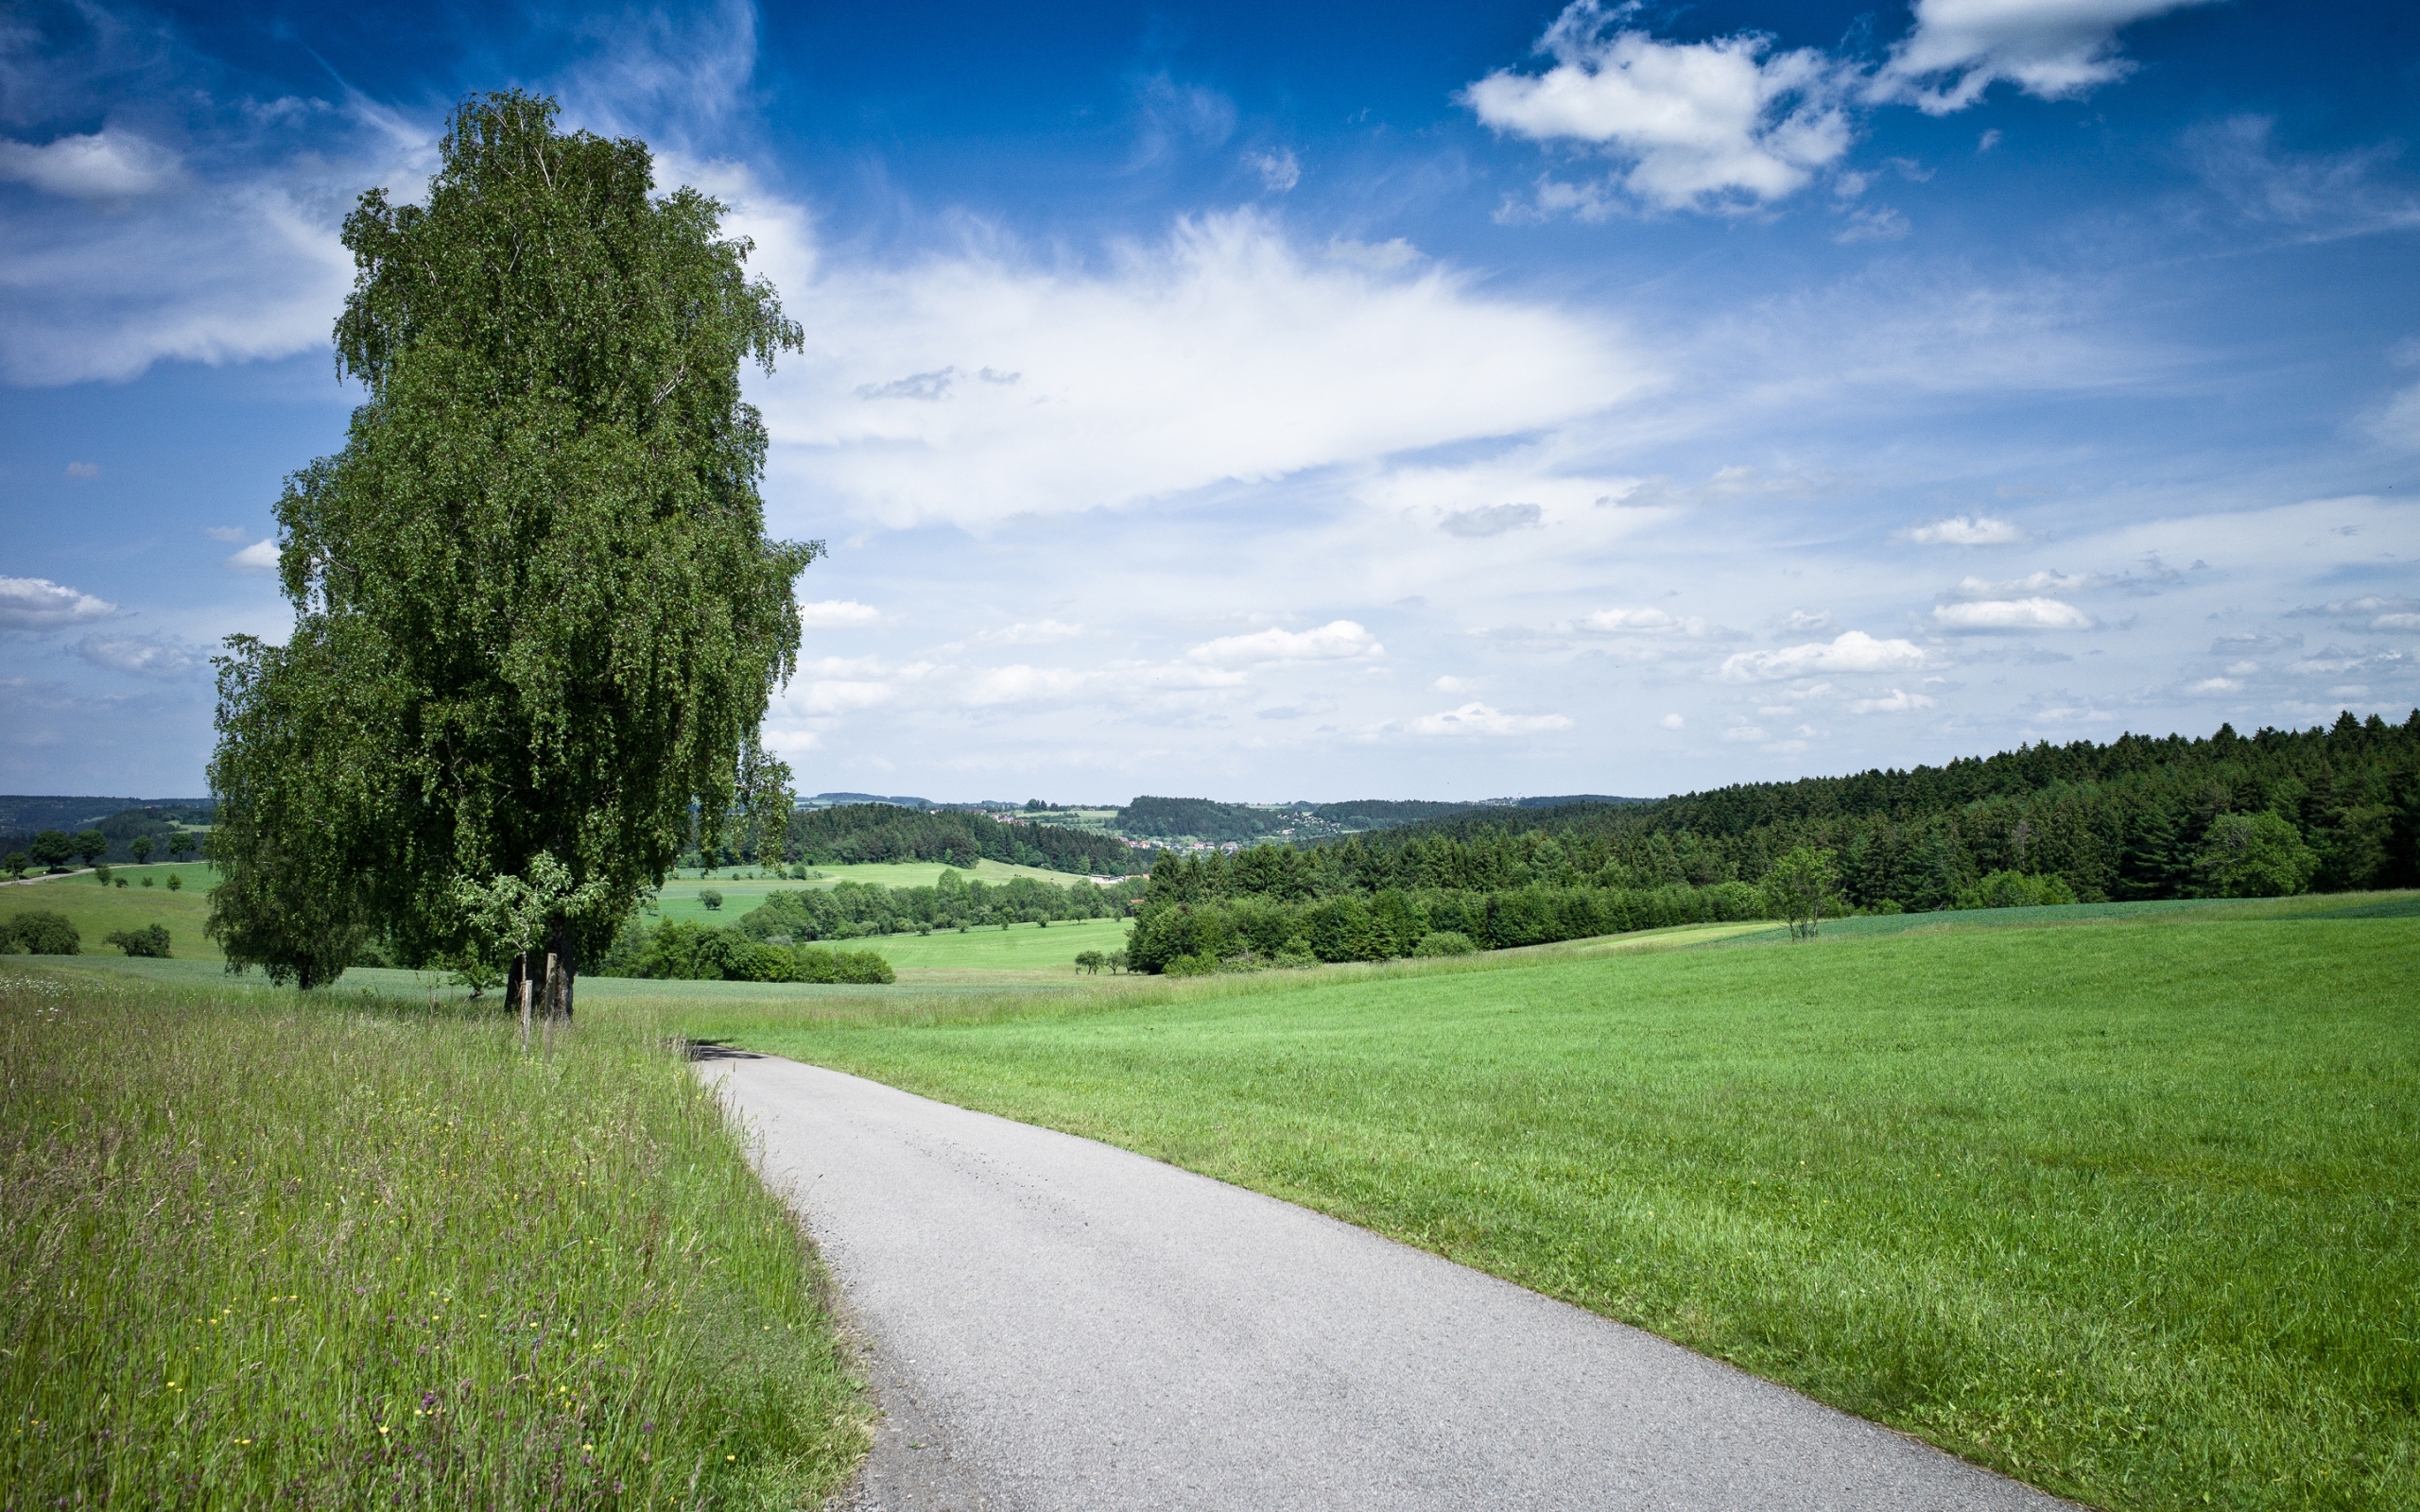 roads, trees, clouds, landscape Fields HD Android Wallpapers